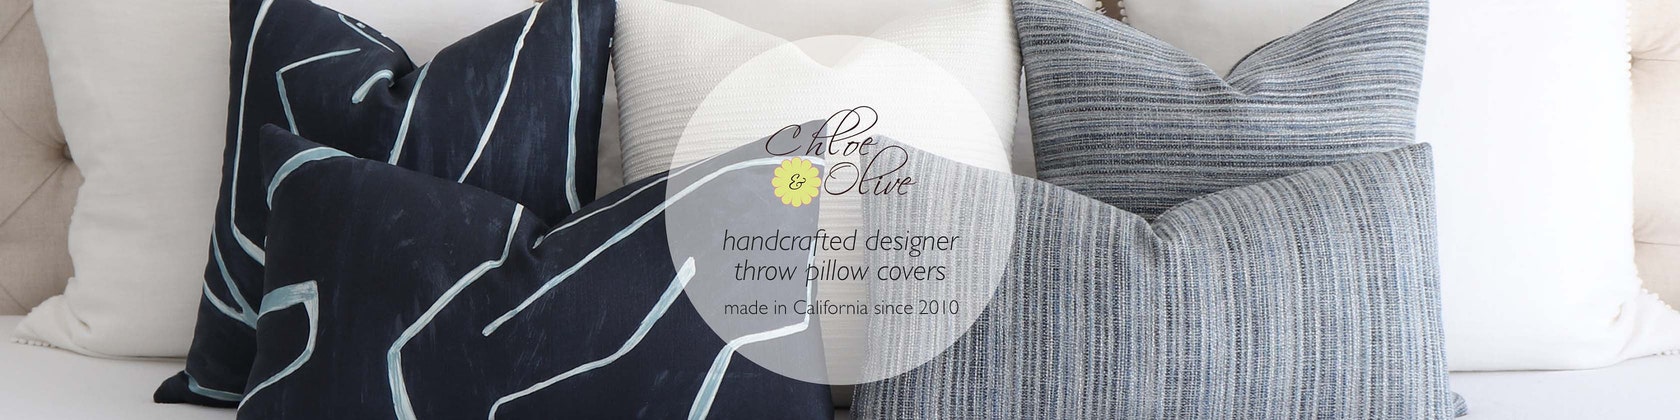 Chloe and Olive Pillow Shop  Custom Made Designer Pillow Covers